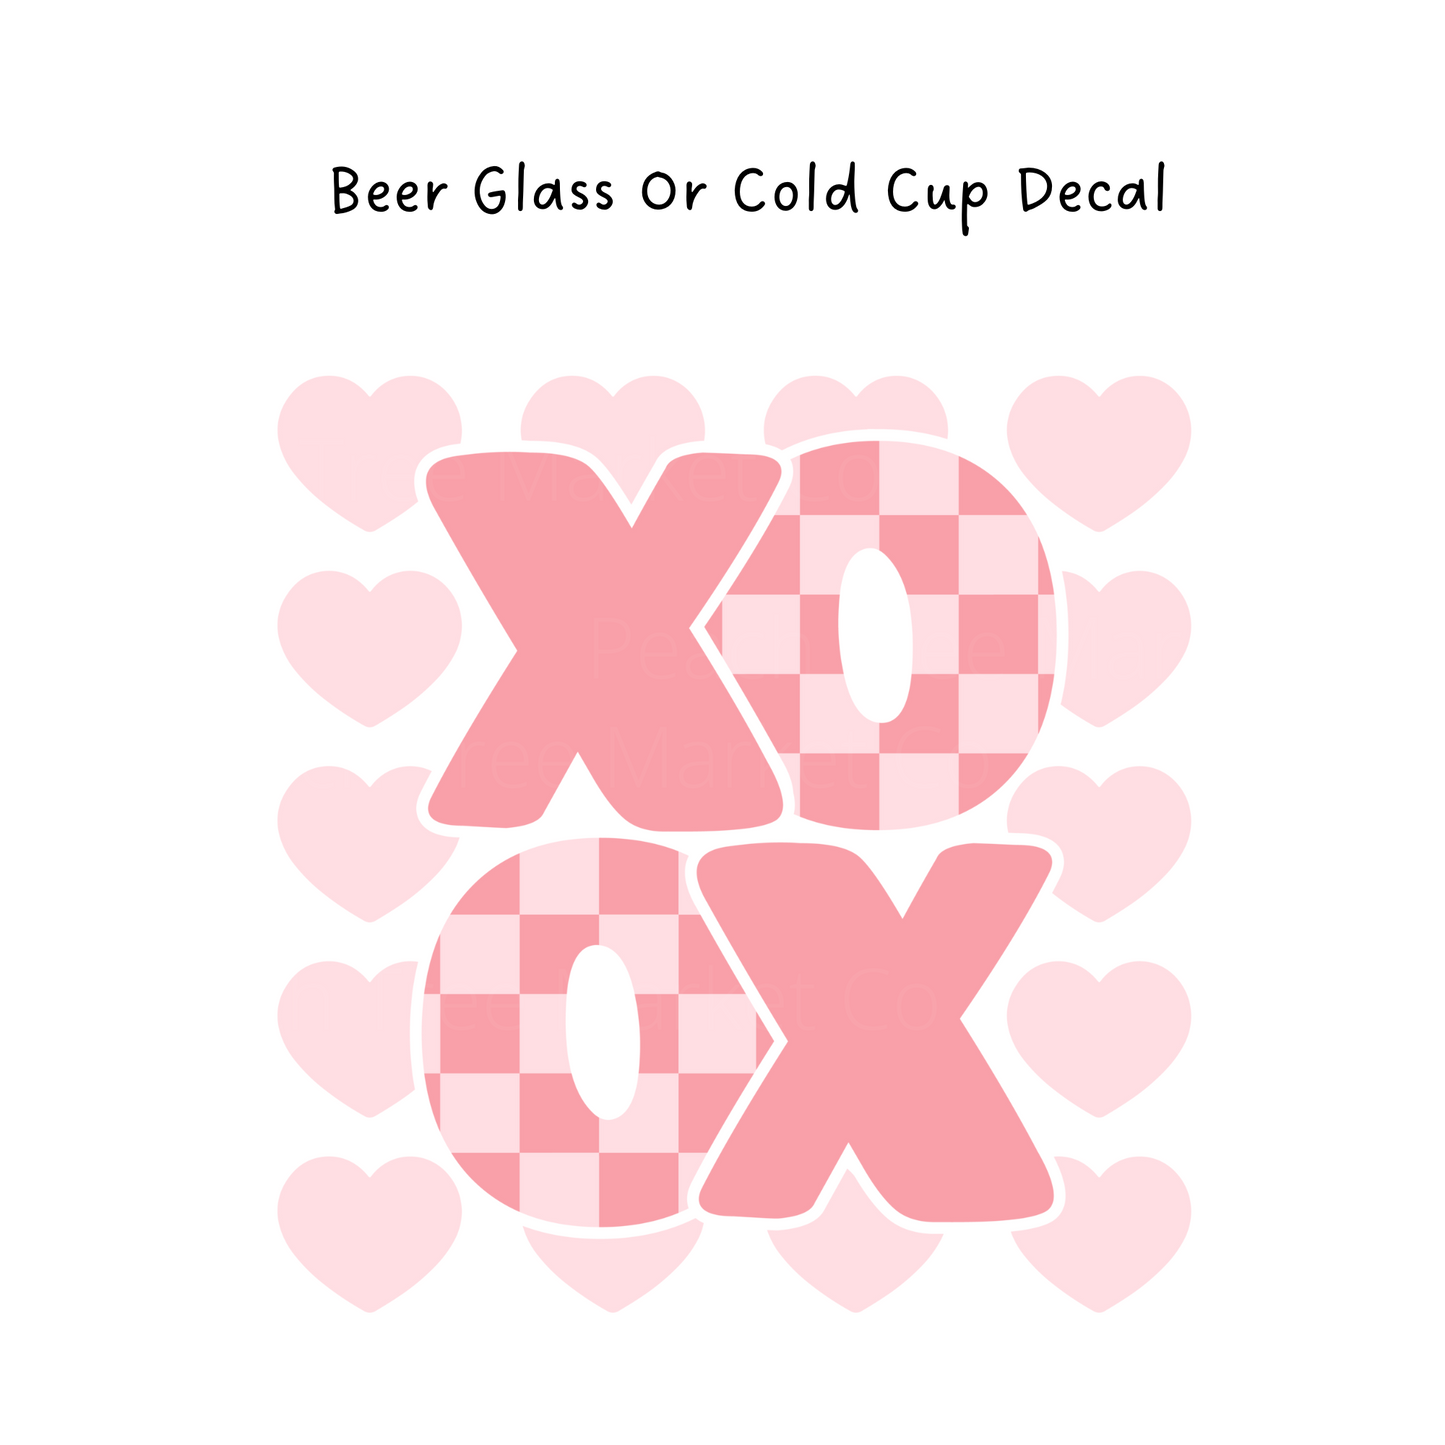 XOXO Cold Cup or Beer Glass Decal